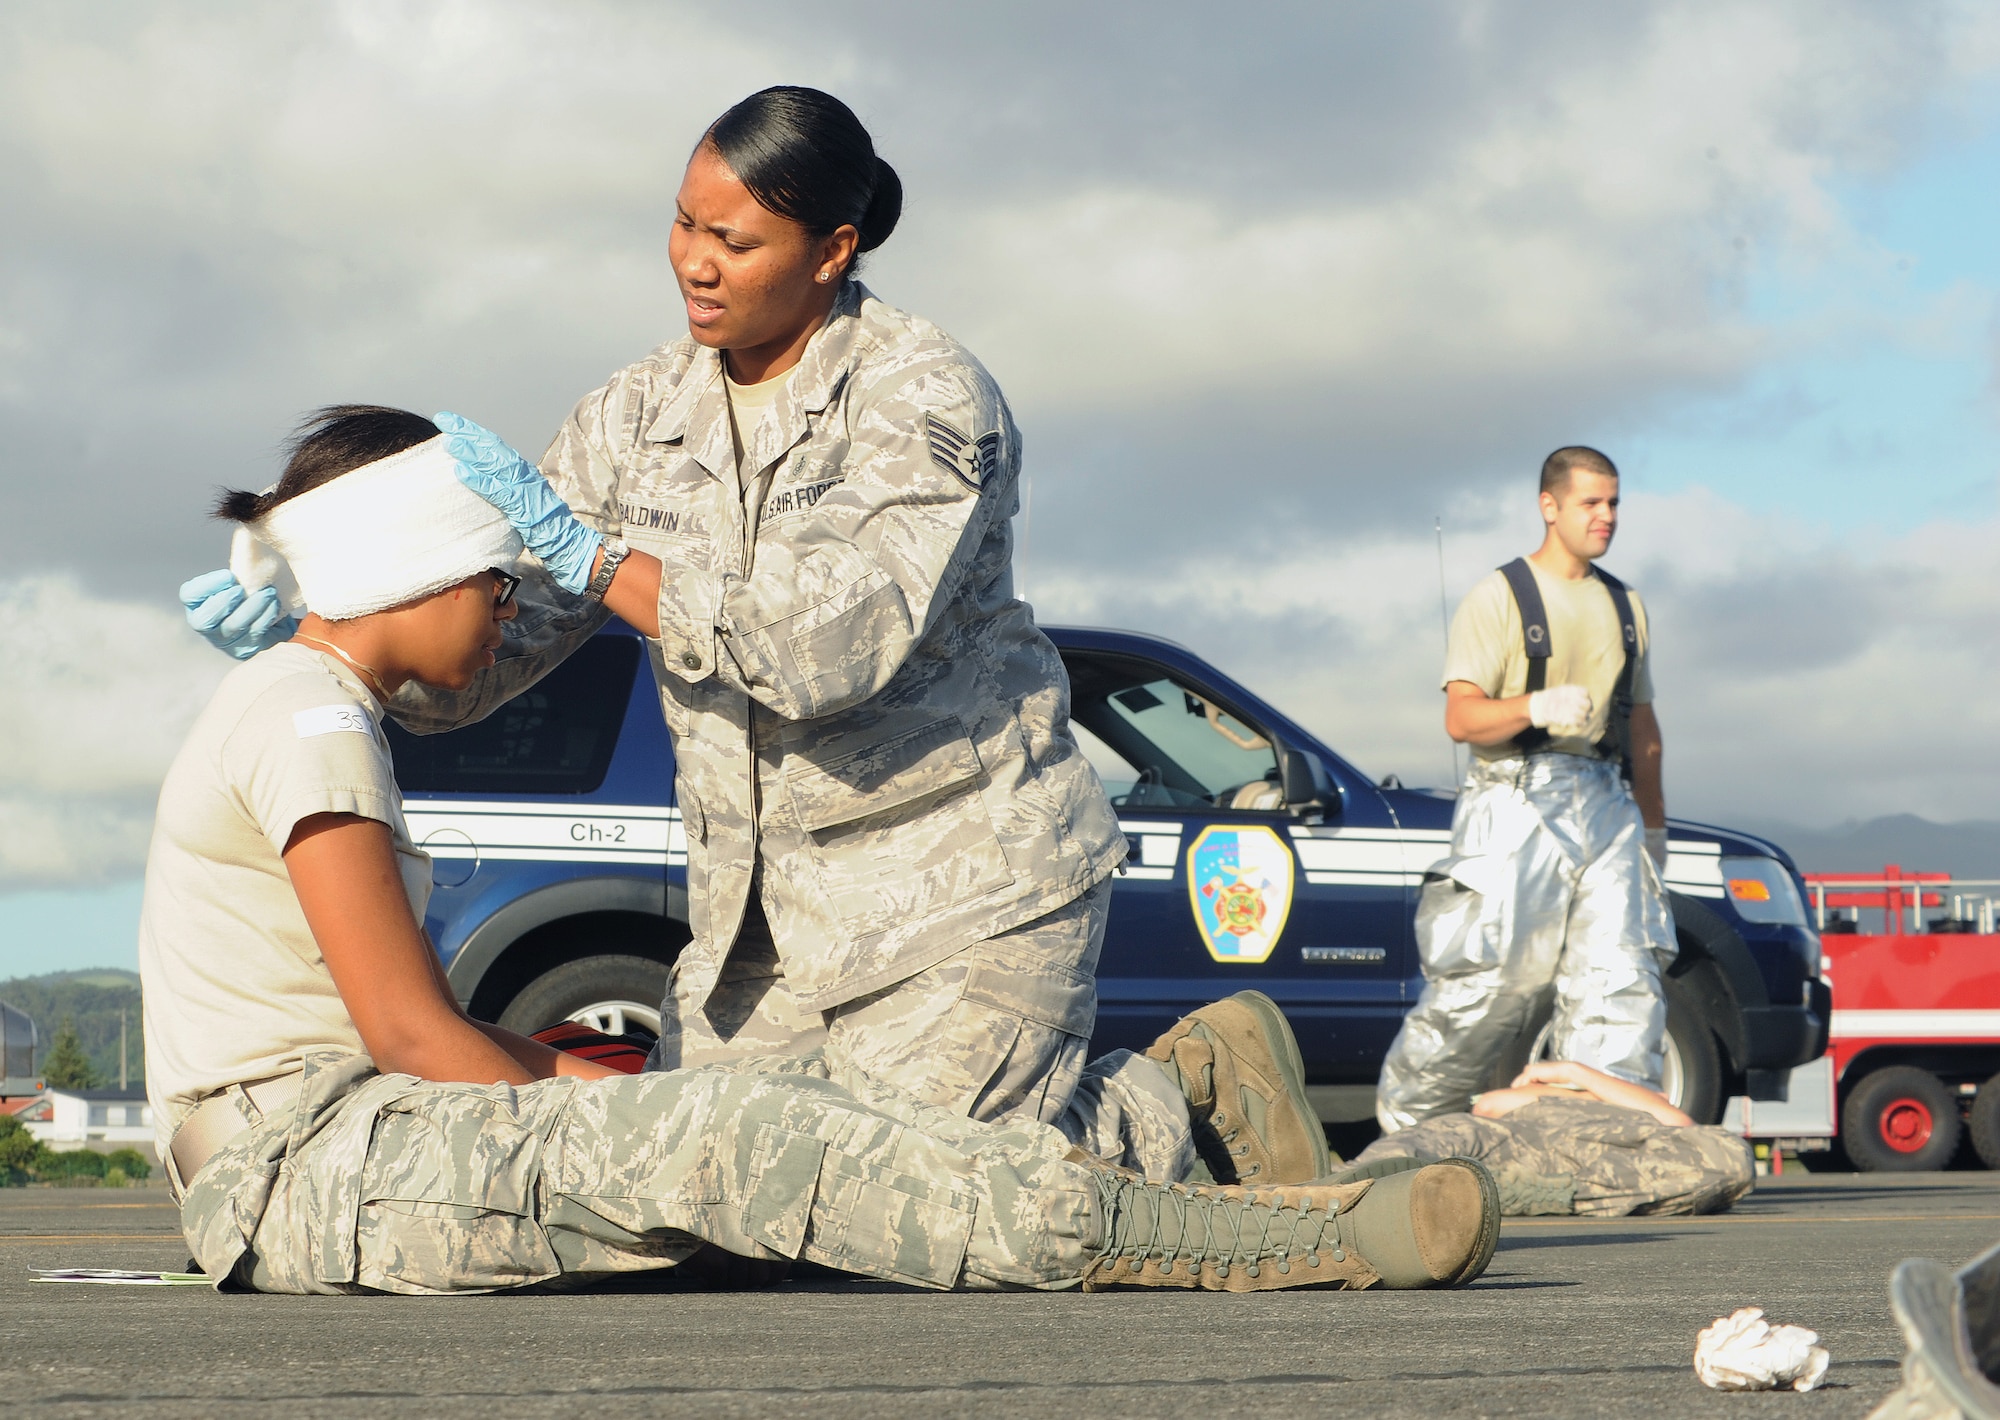 Staff Sgt. Yvette Baldwin gives first aid to a mock victim during a major accident response exercise Aug. 23, 2013, at Lajes Field, Azores. Baldwin is the NCO in charge of flight medicine at Lajes Field and is responsible for the care of Lajes' air traffic controllers and other Airmen whose day-to-day activities include occupational hazards. Baldwin is assigned to the 65th Medical Operations Squadron. (U.S. Air Force photo/Guido Melo) 